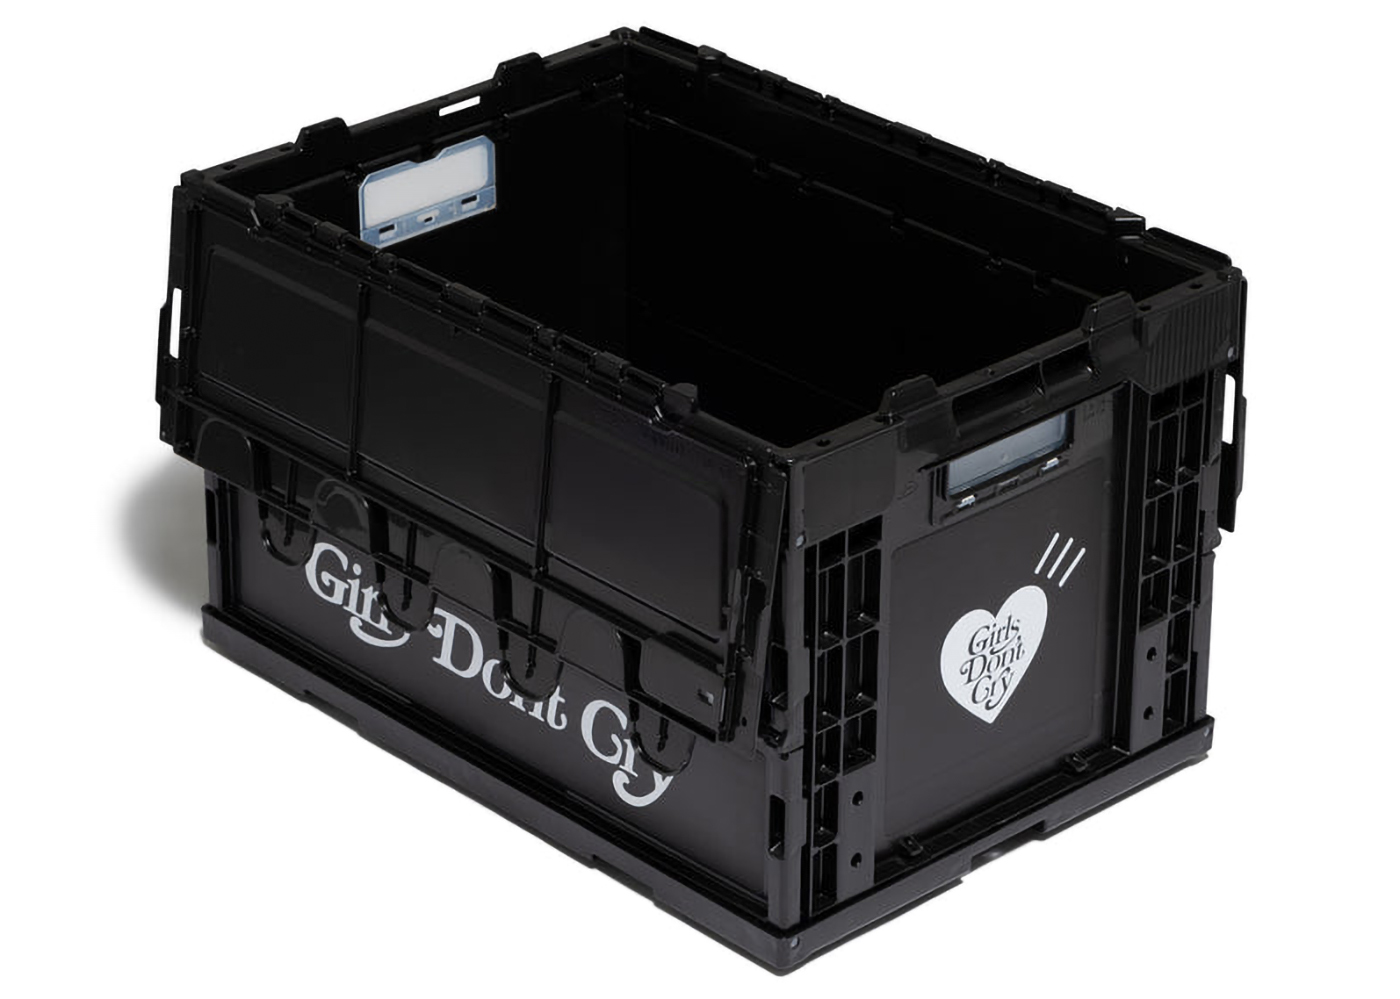 Human Made x Girls Don't Cry 50L Container Black